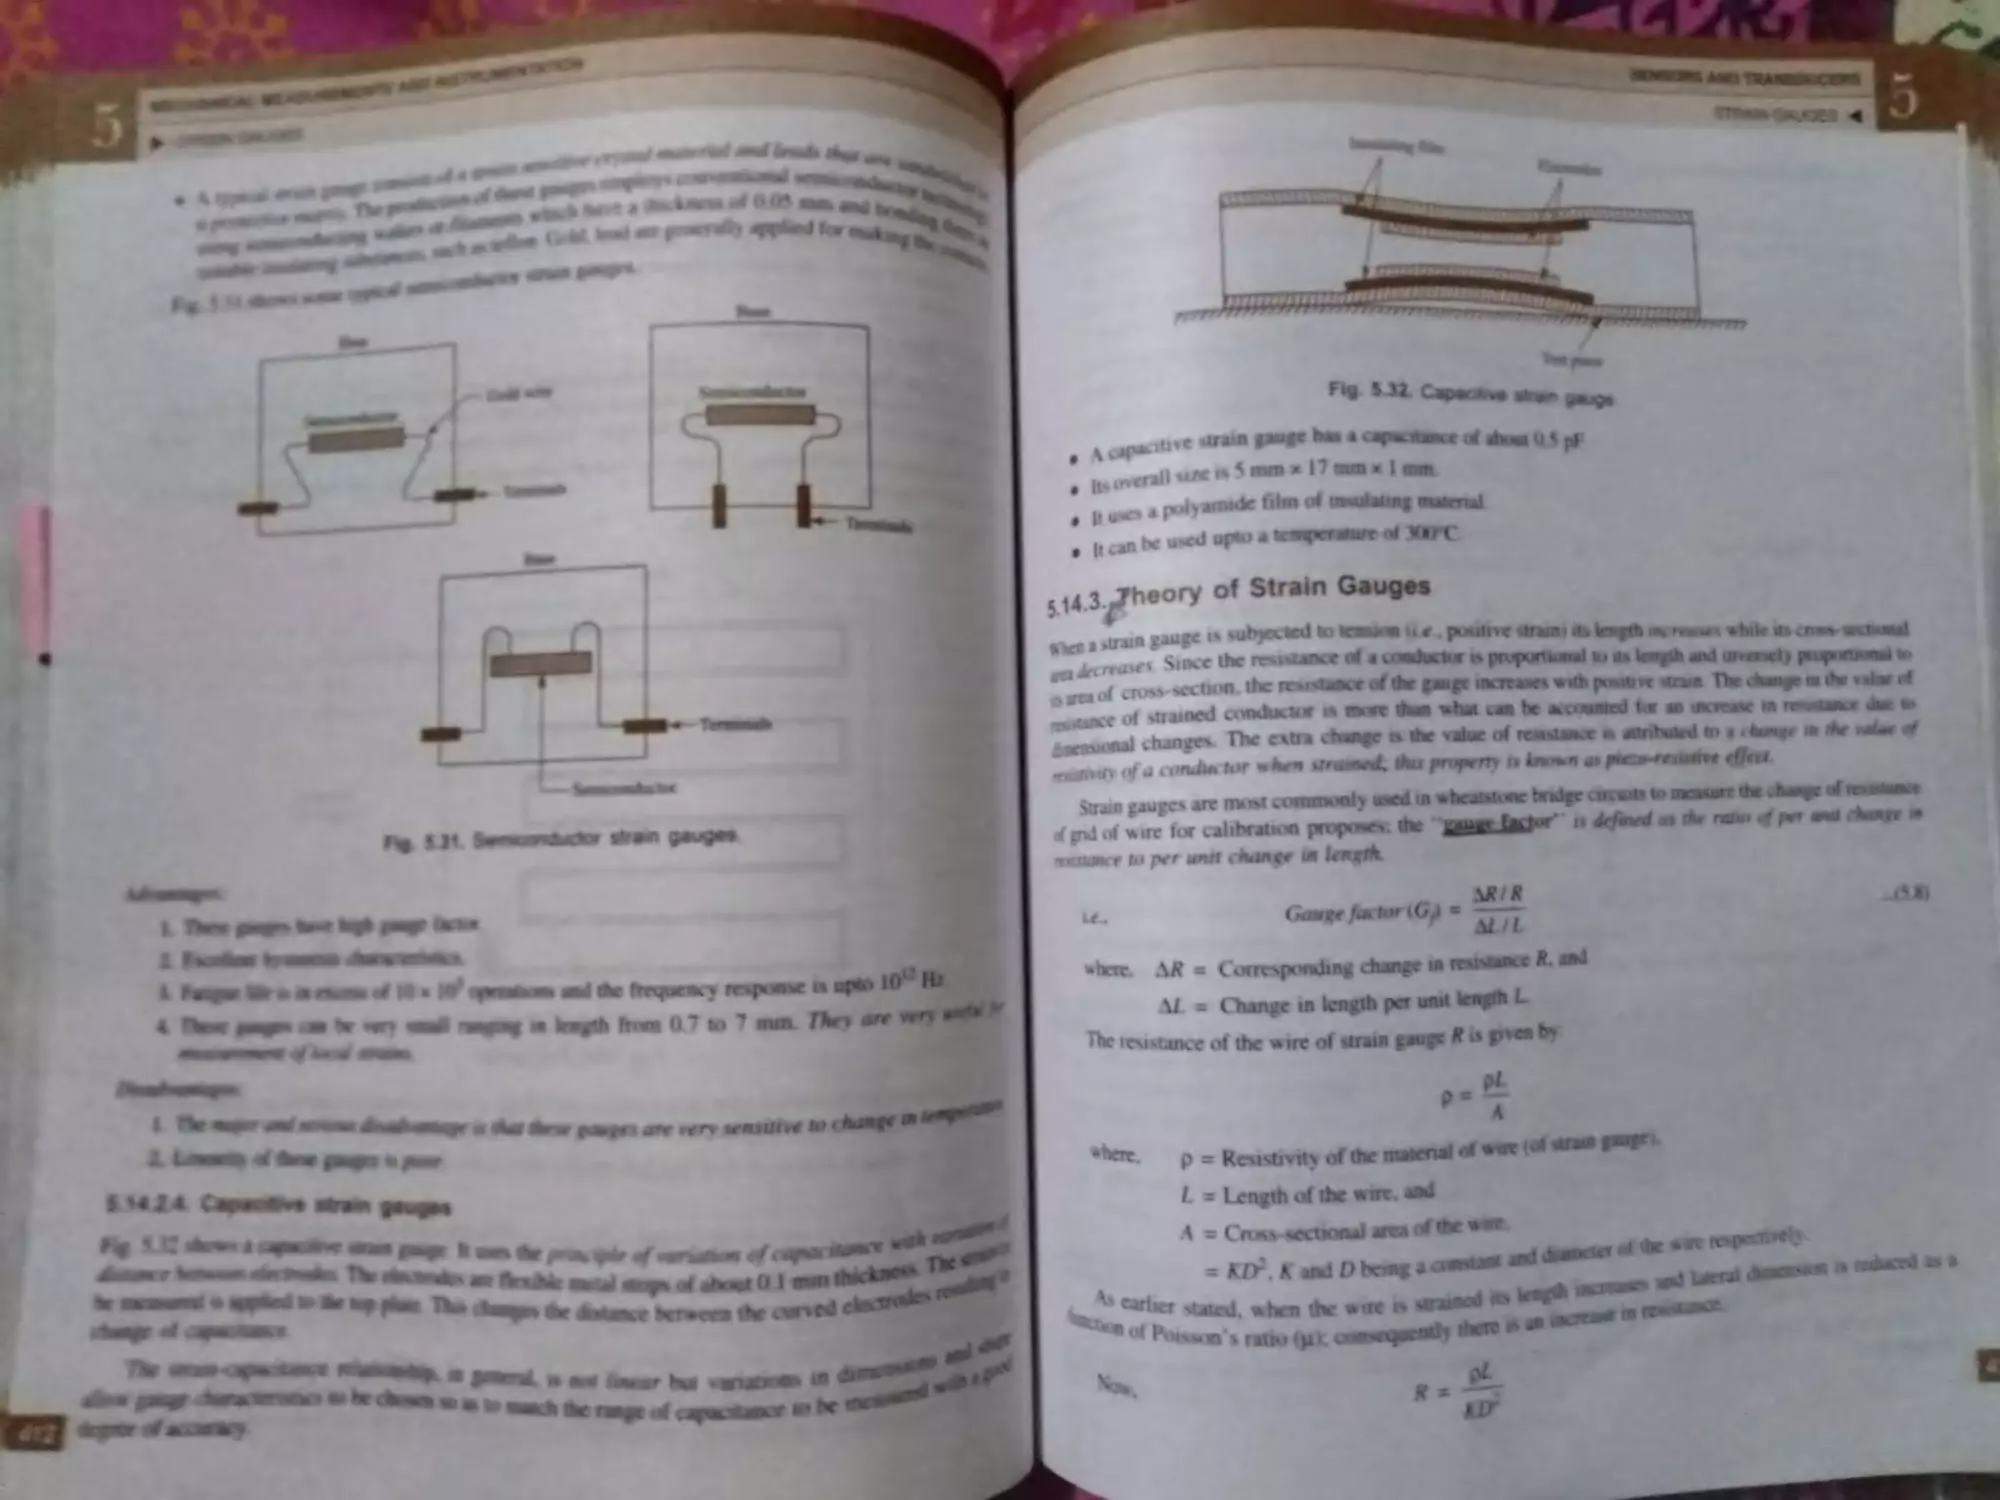 5.14.2.4. Capacitive Strain Gauges
5.14.3. Theory of Strain Gauges